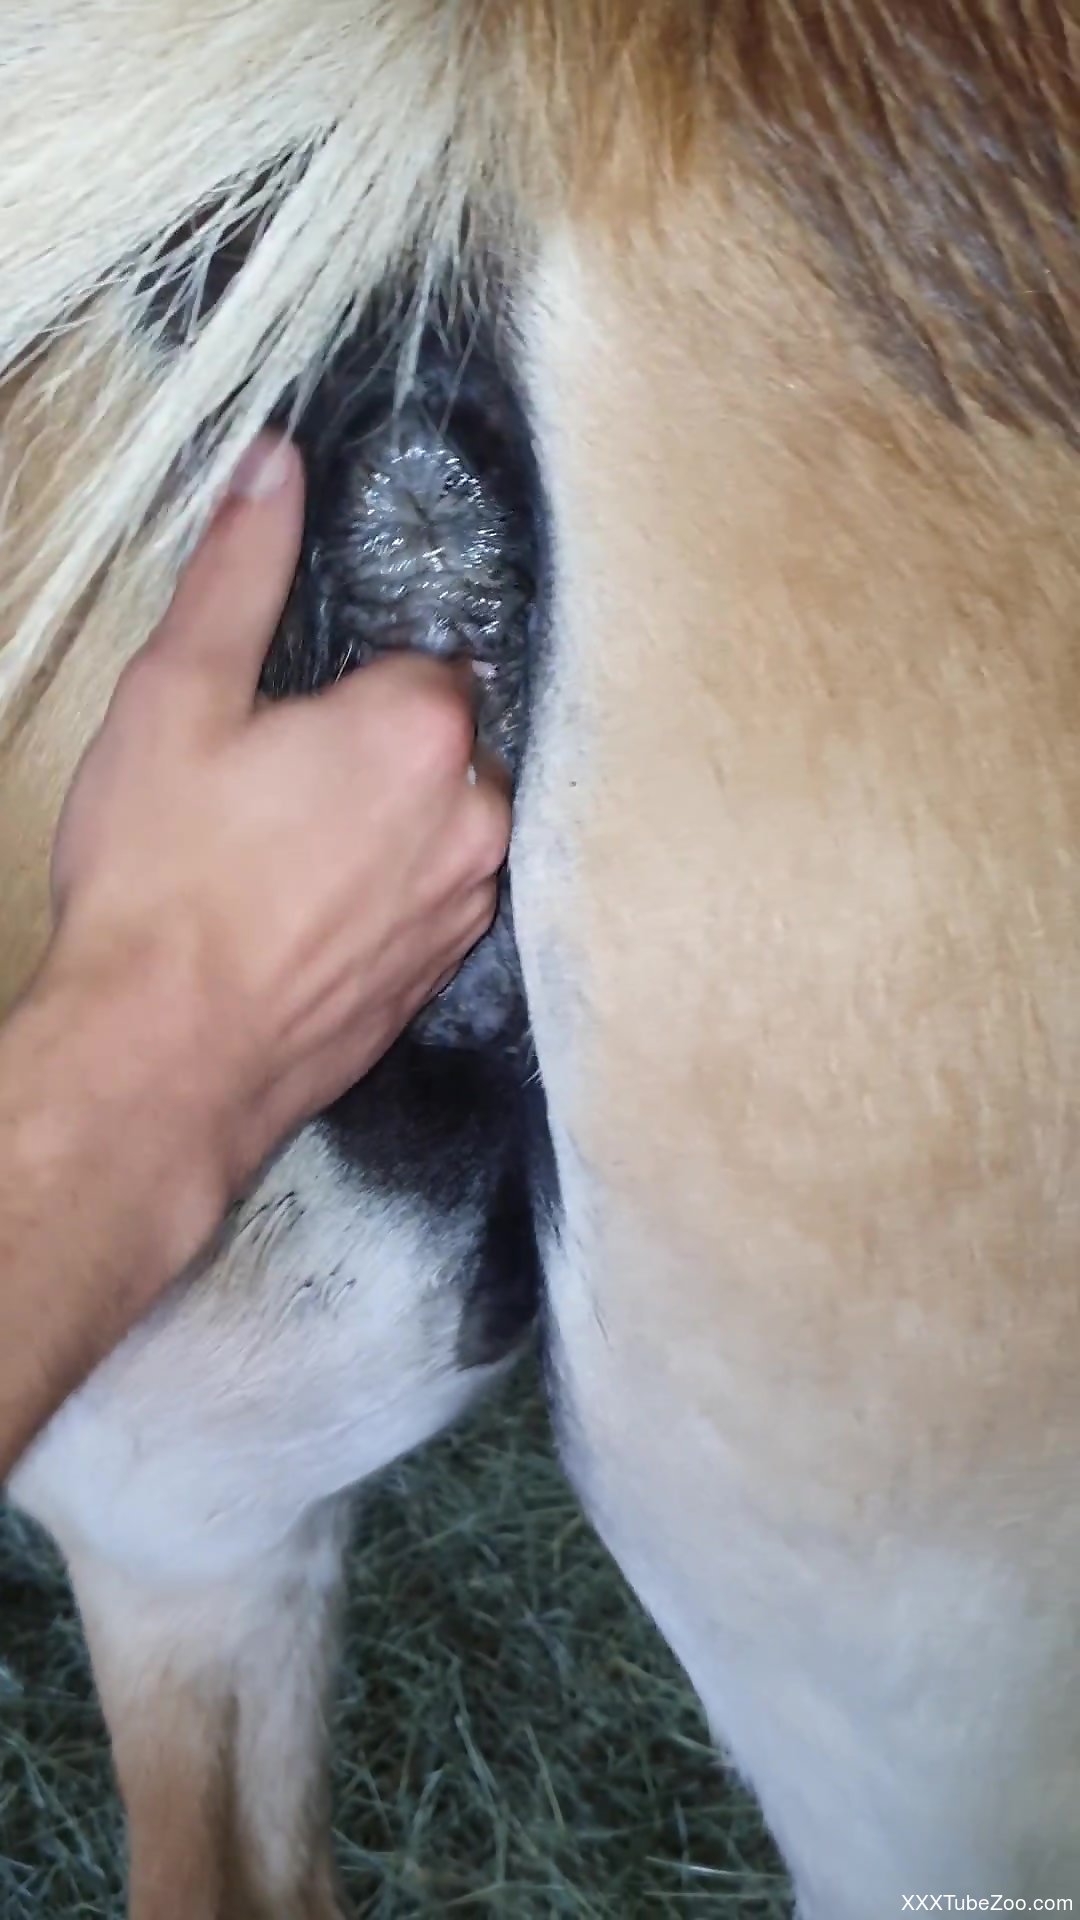 Mare Horse Pussy Fingering - Man feels aroused when fingering the horse's cunt